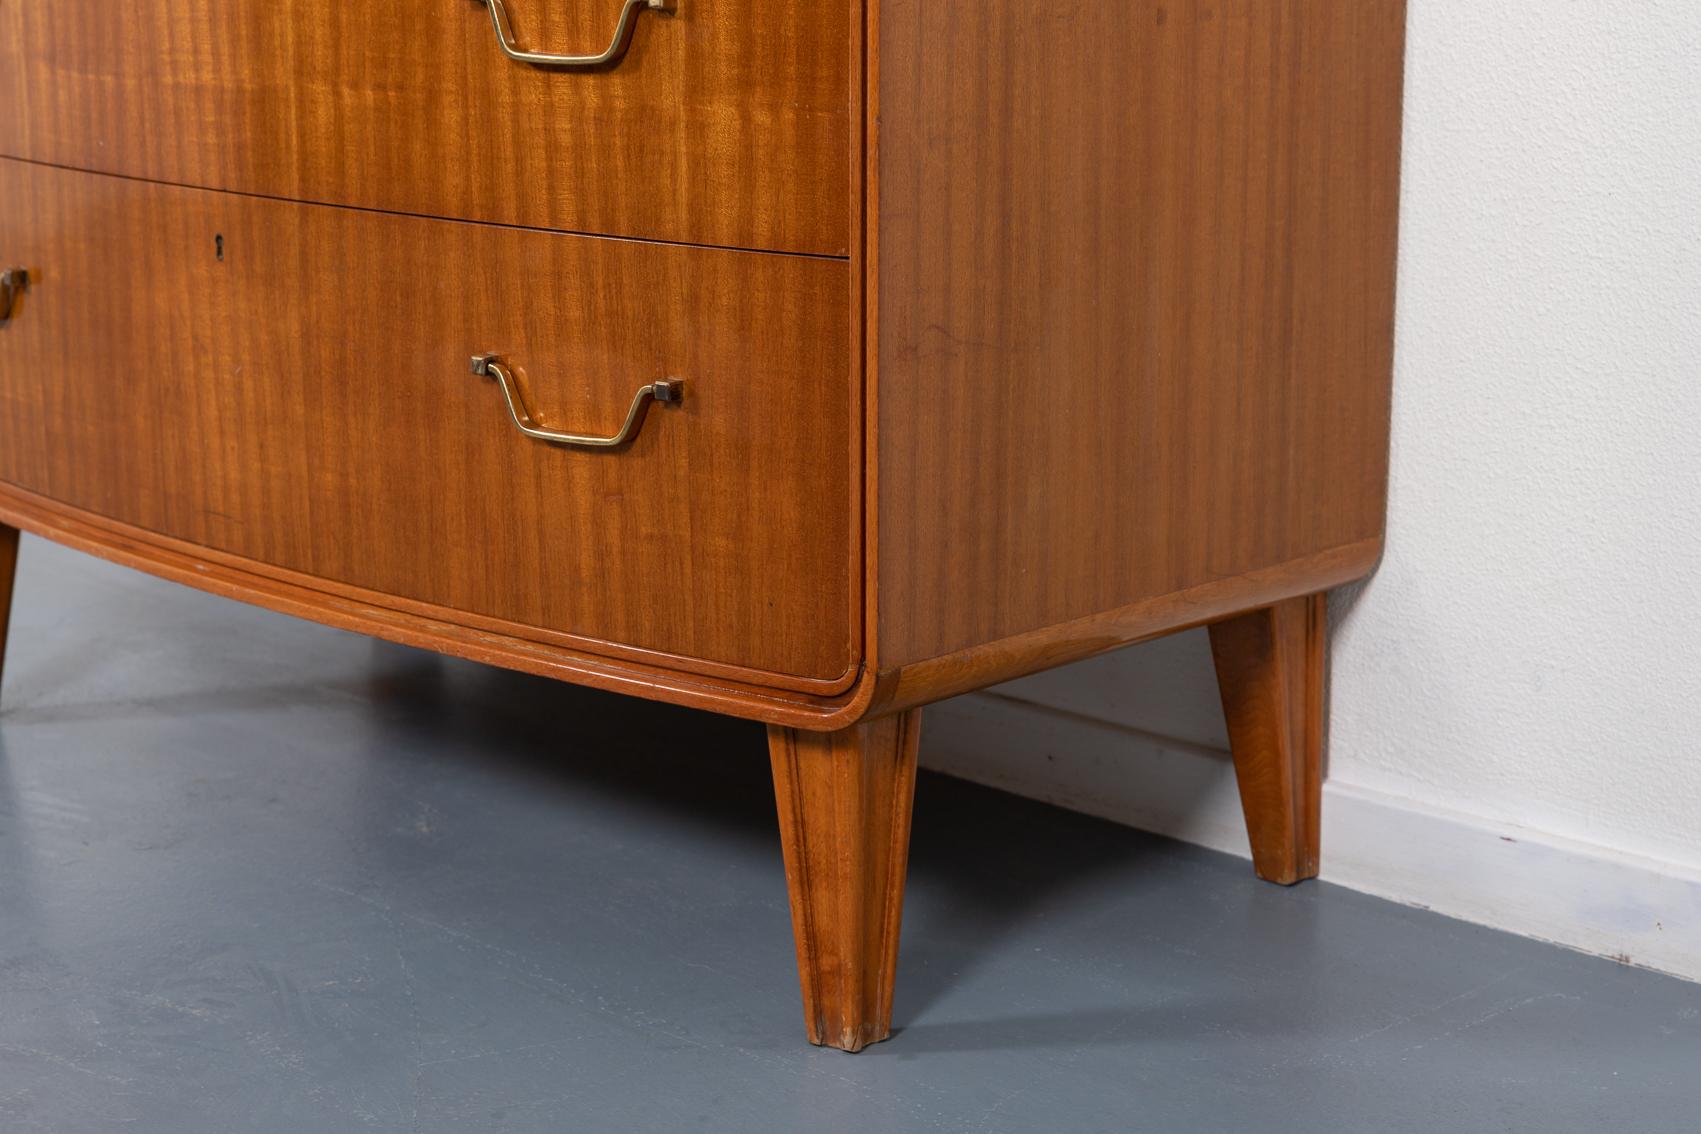 Scandinavian Modern Chest of drawers/dressing table by Axel Larsson for Bodafors, 1960’s Sweden For Sale